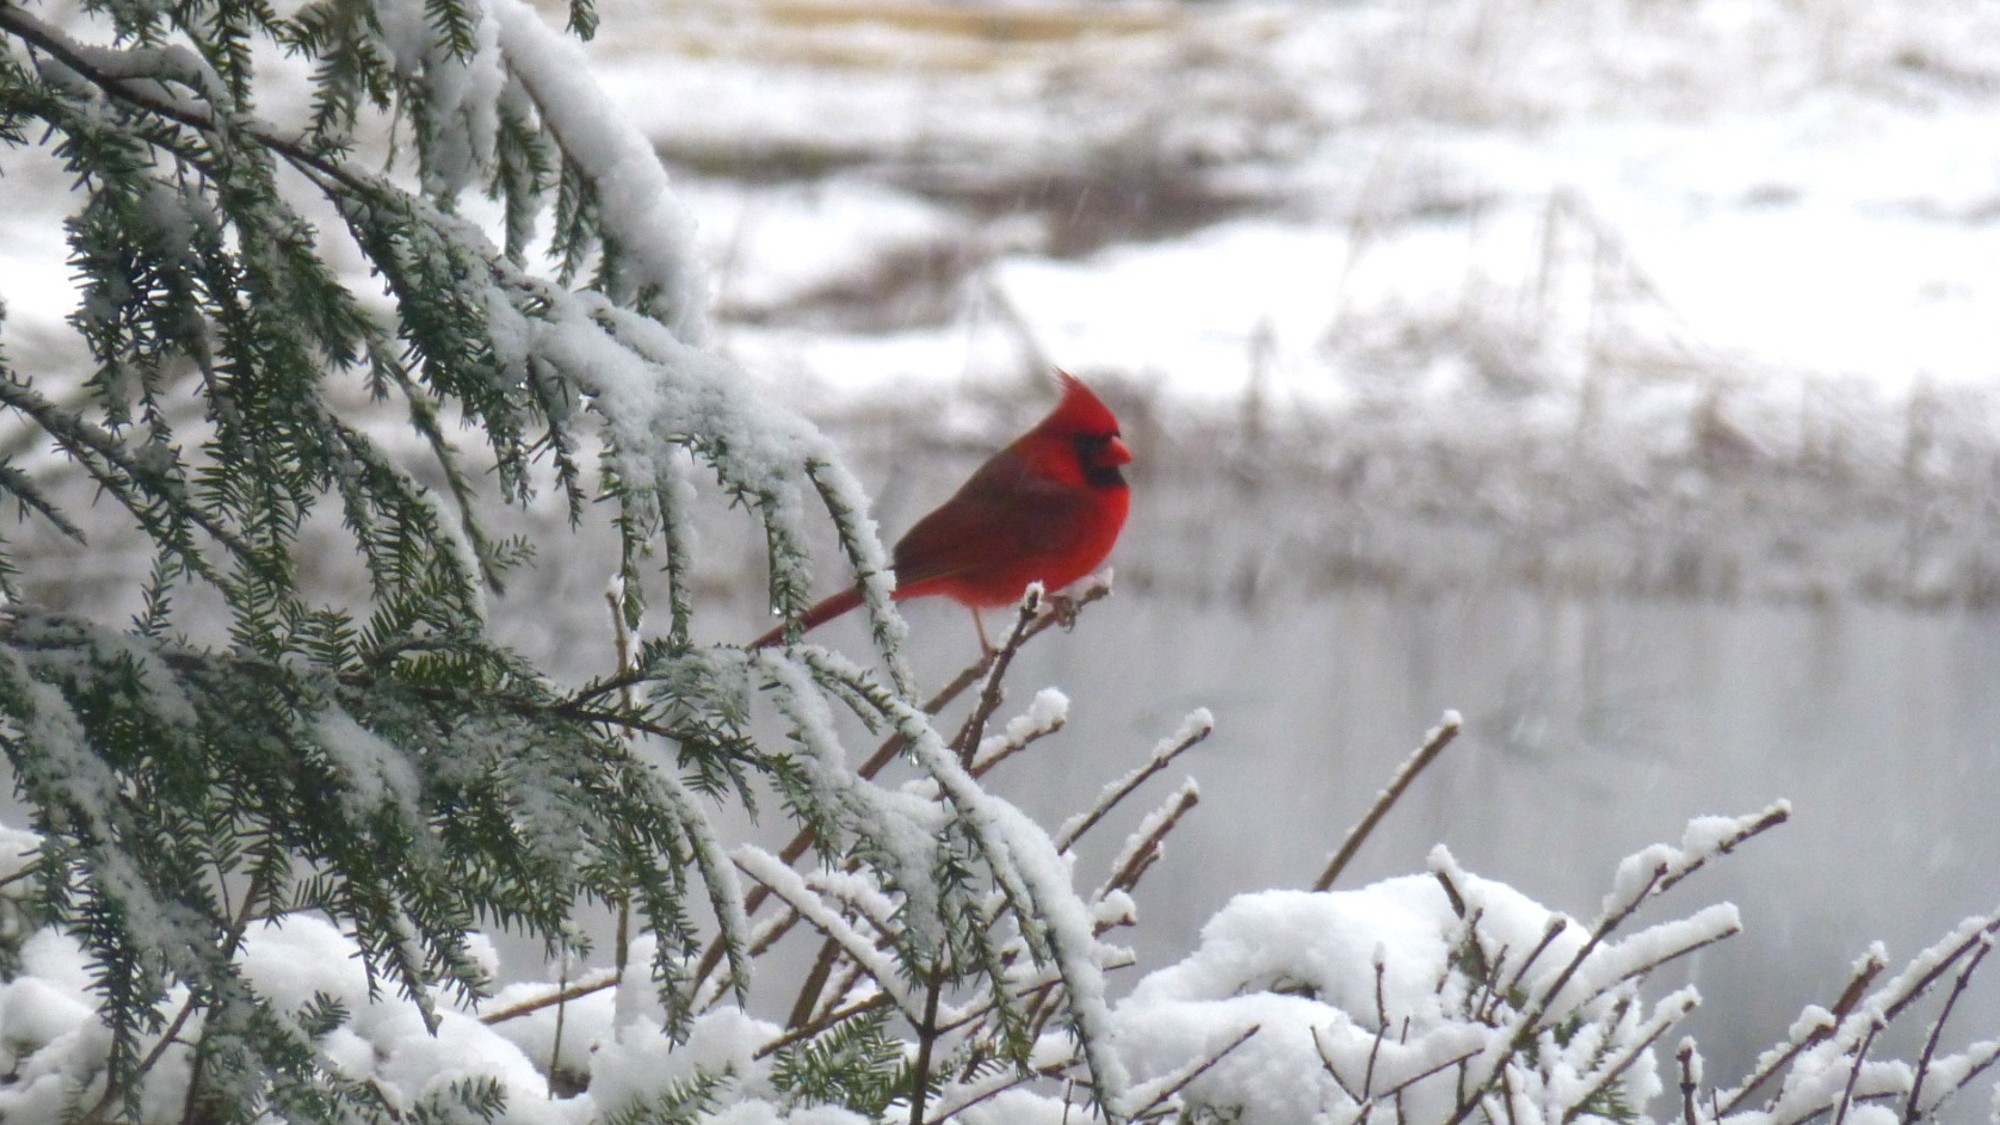 Striking red bird sitting on the top of a bare shrub near snow covered pine branches with a snowy pond in the background